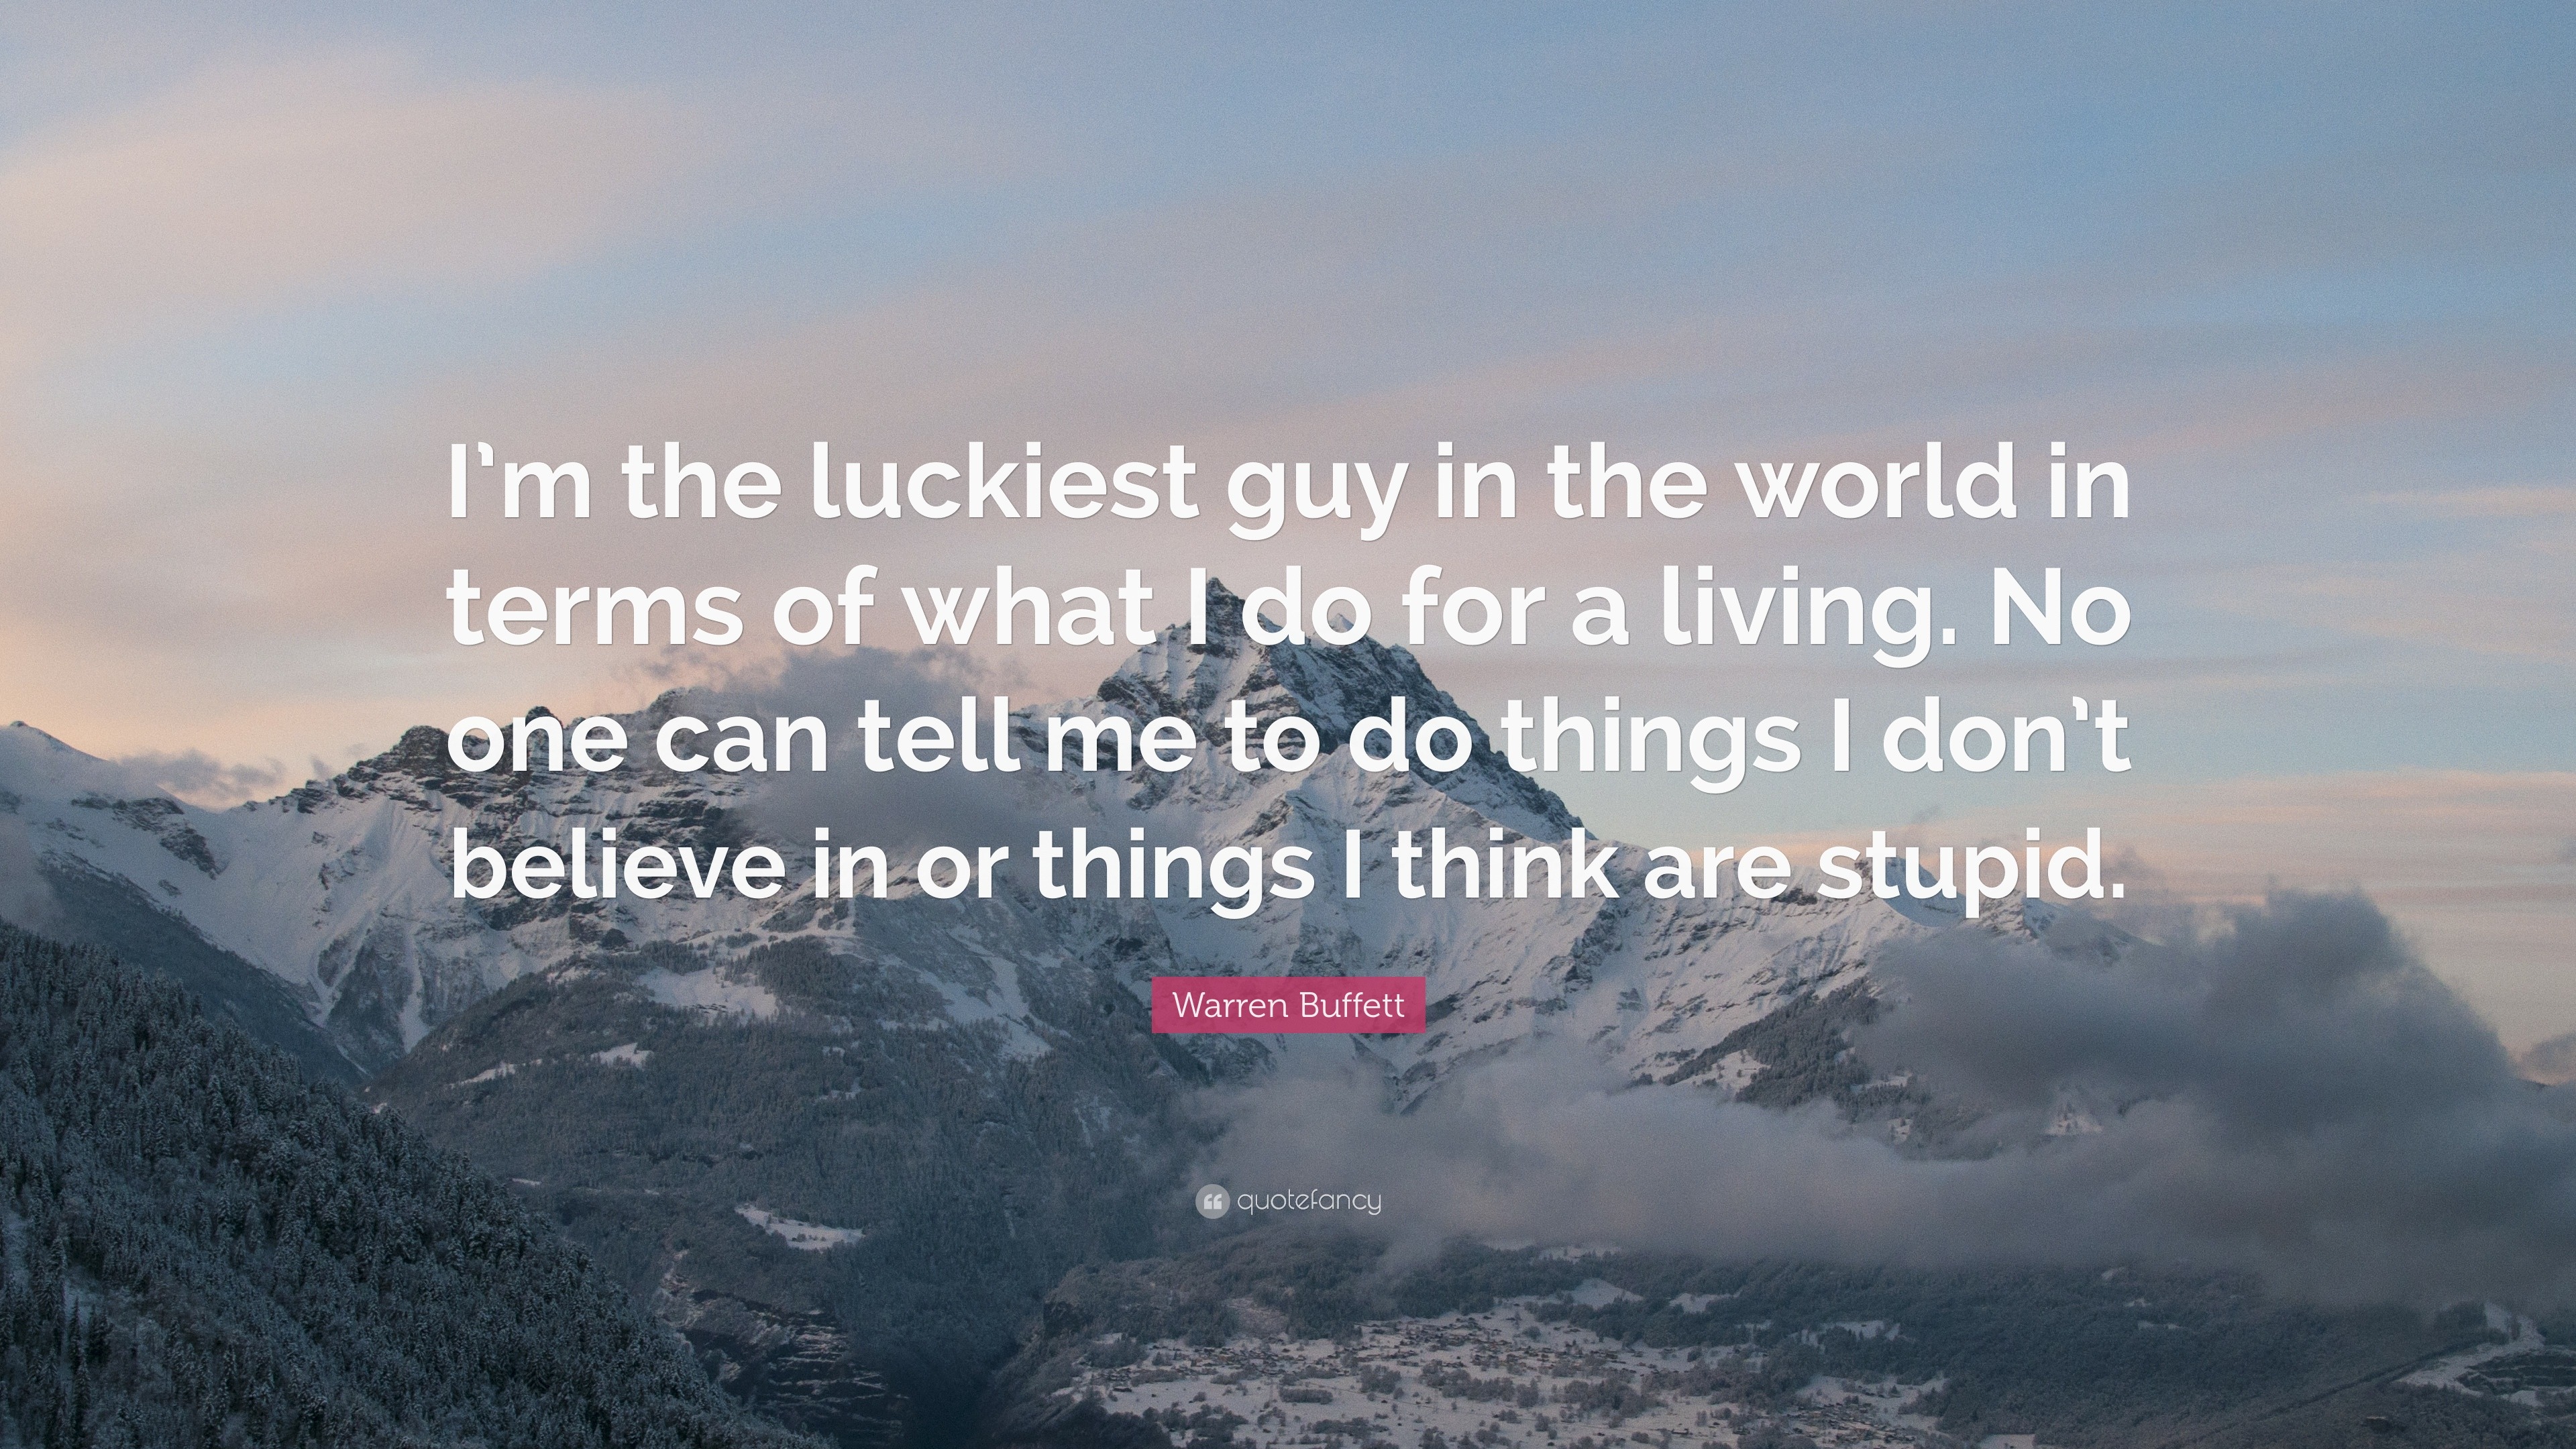 I'm the luckiest guy in the world”